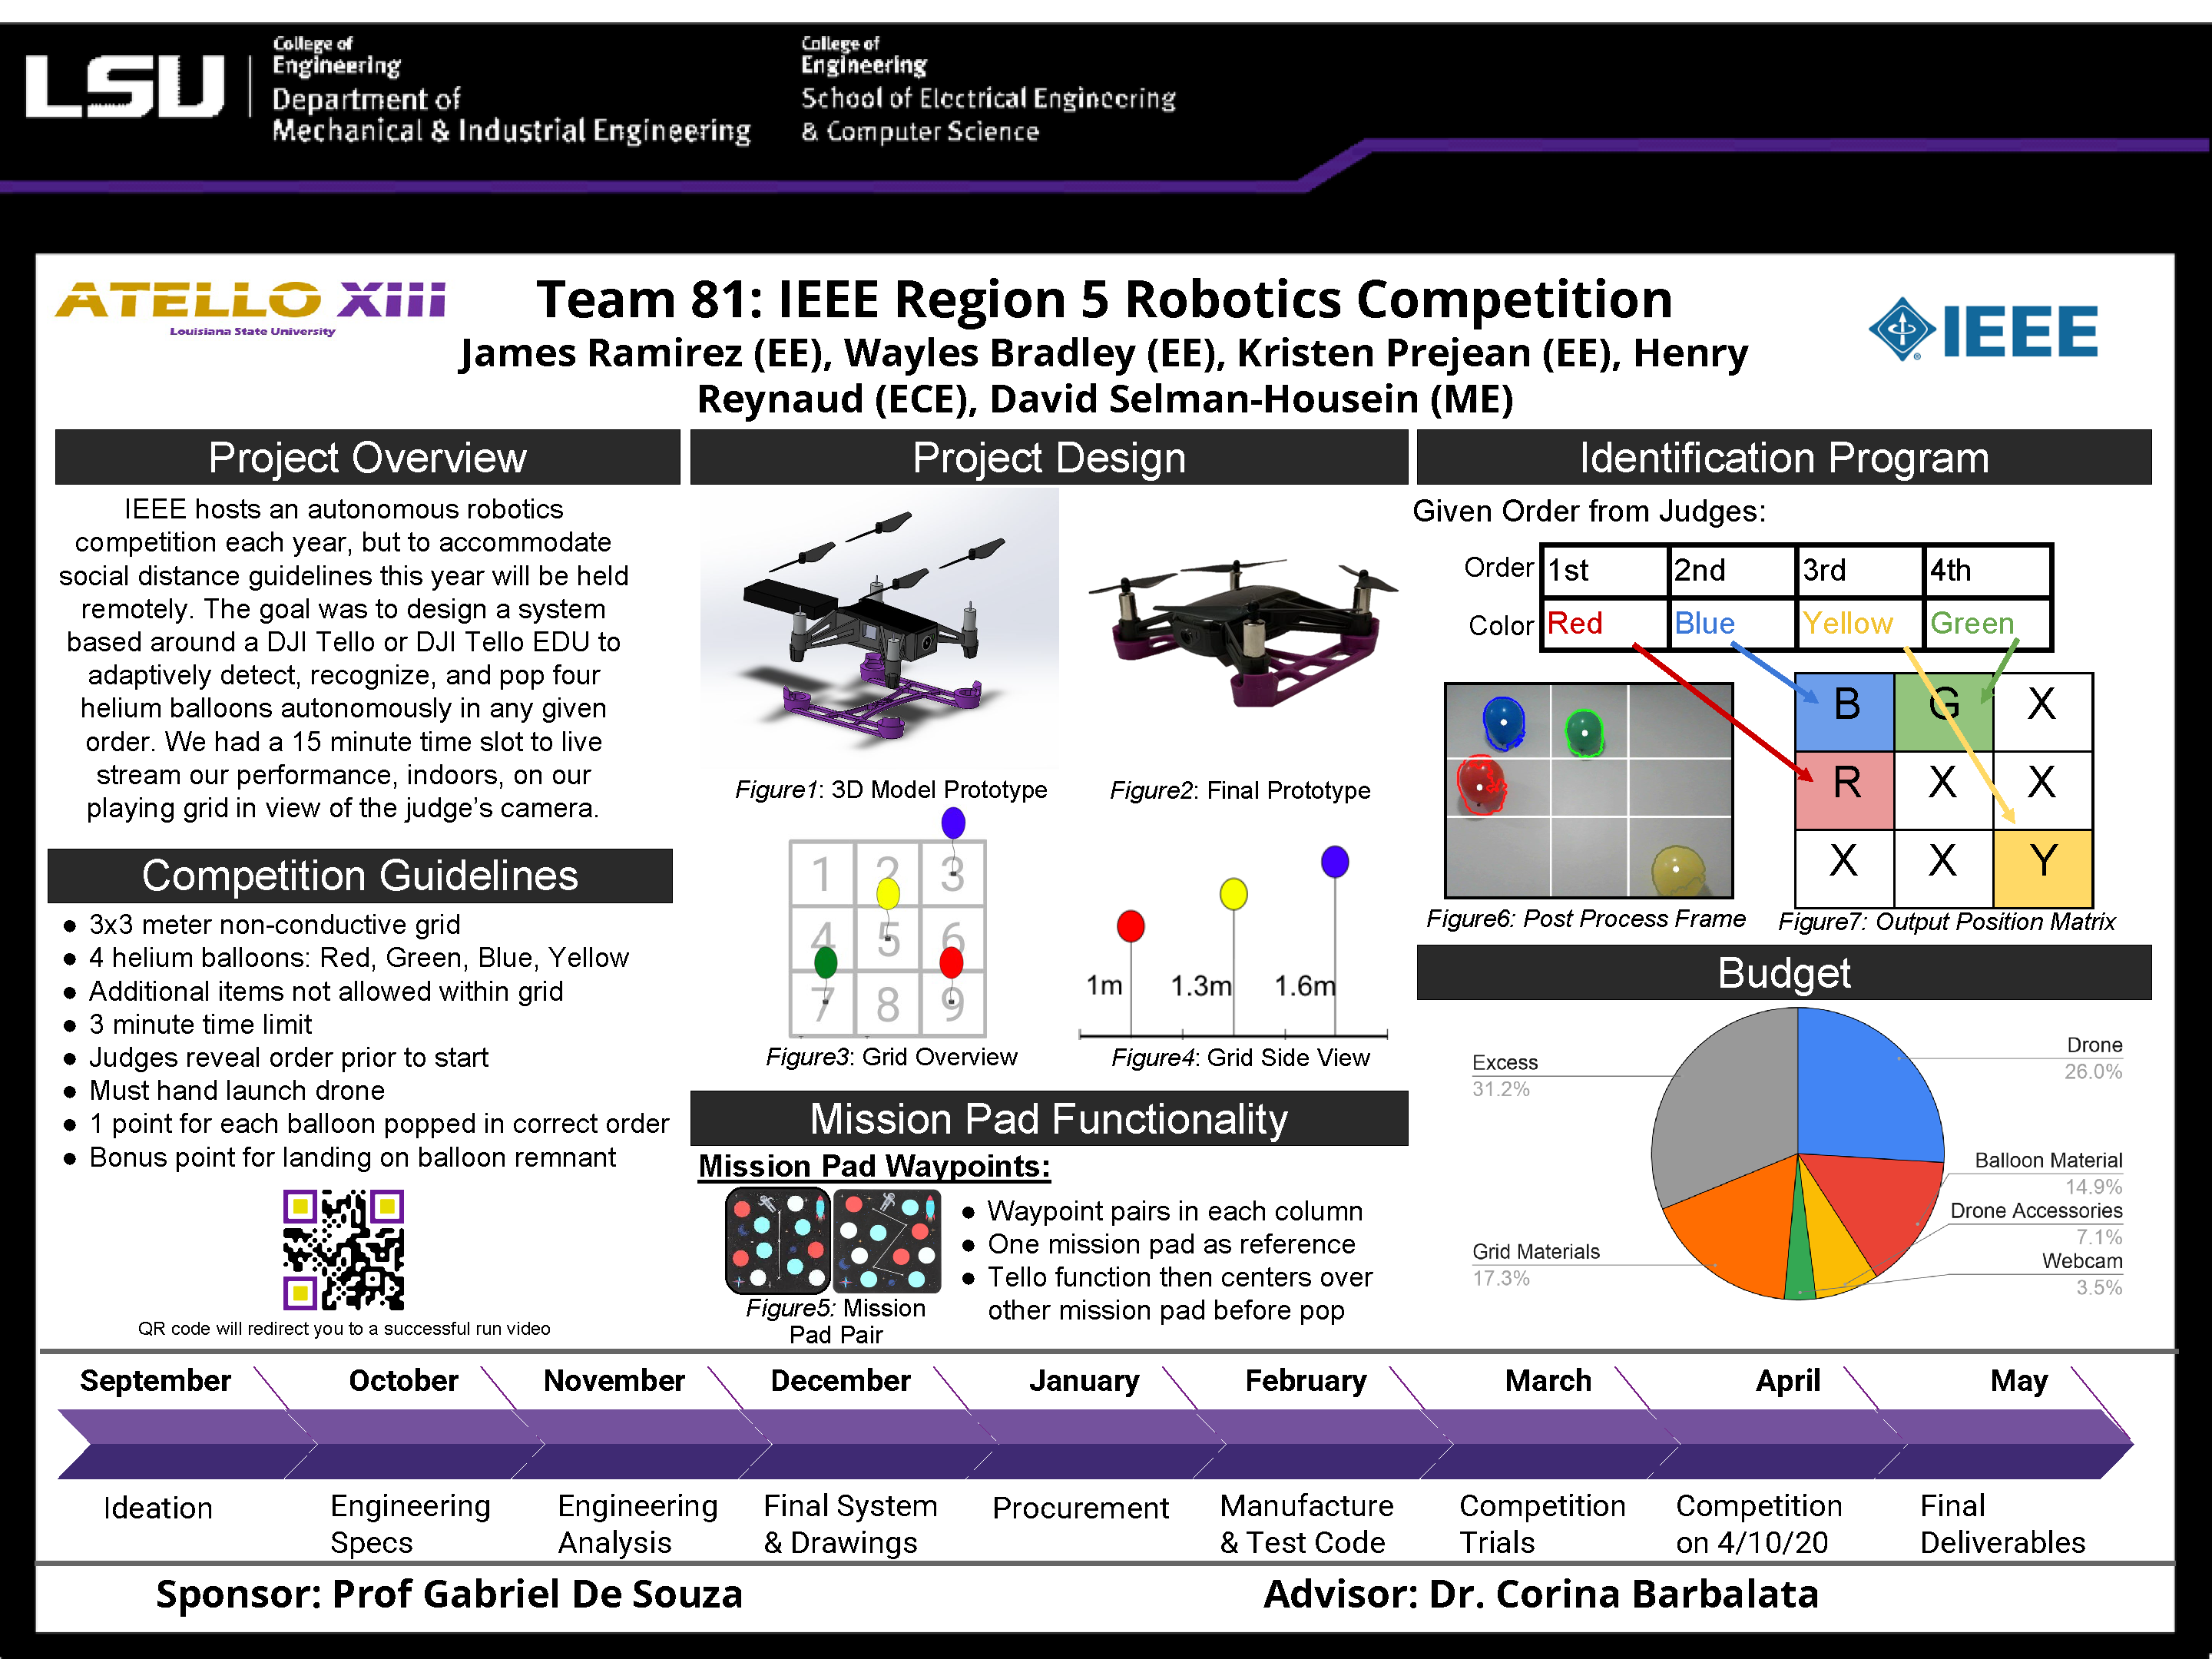 Project 81: IEEE Region 5 Robot Competition  (2021)